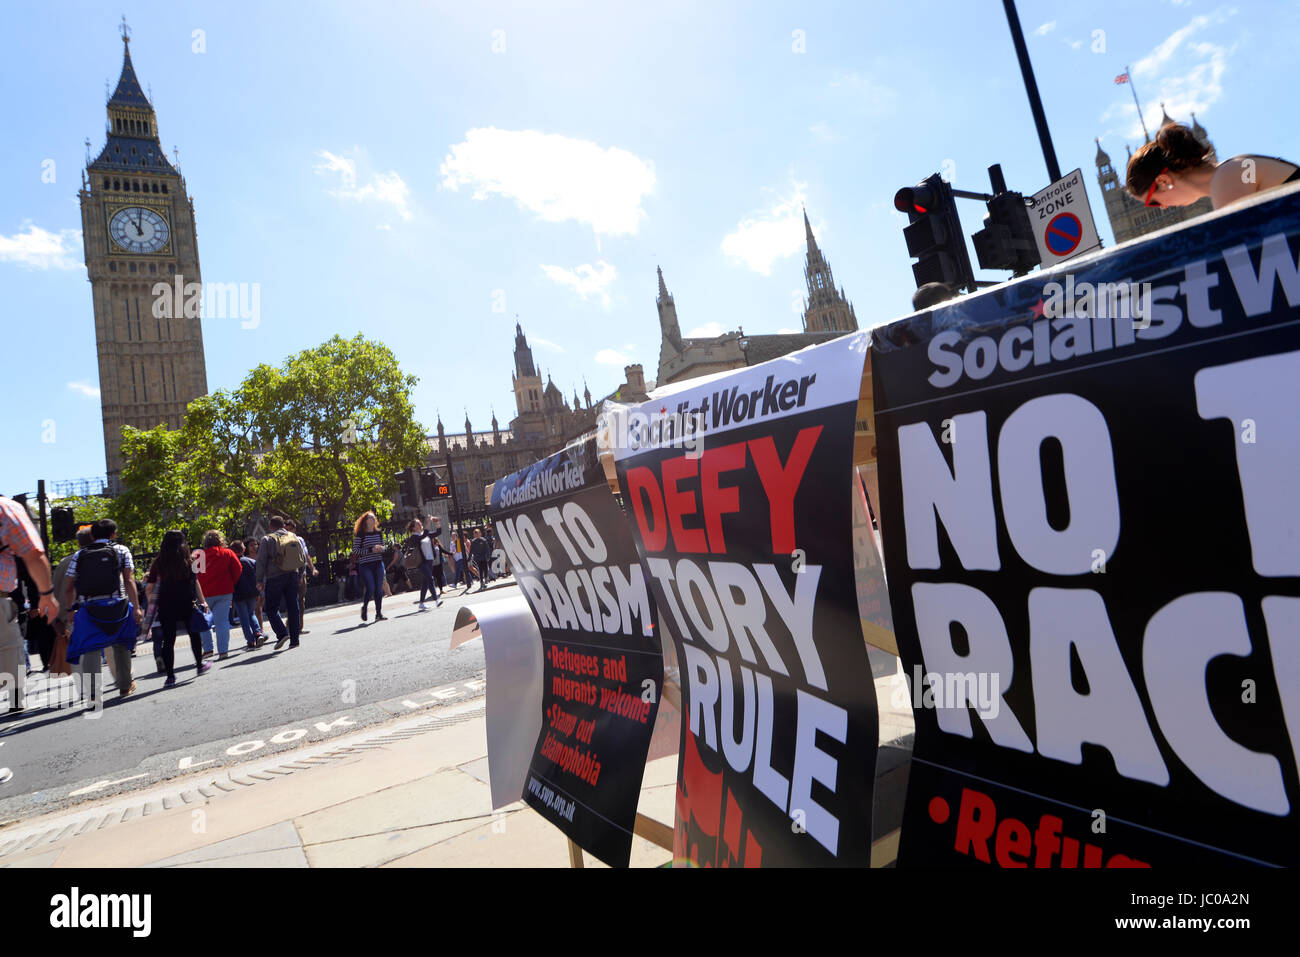 Demonstrators against the Tory DUP alliance gathered in Parliament Square and marched on Downing Street. London. Big Ben. Space for copy Stock Photo